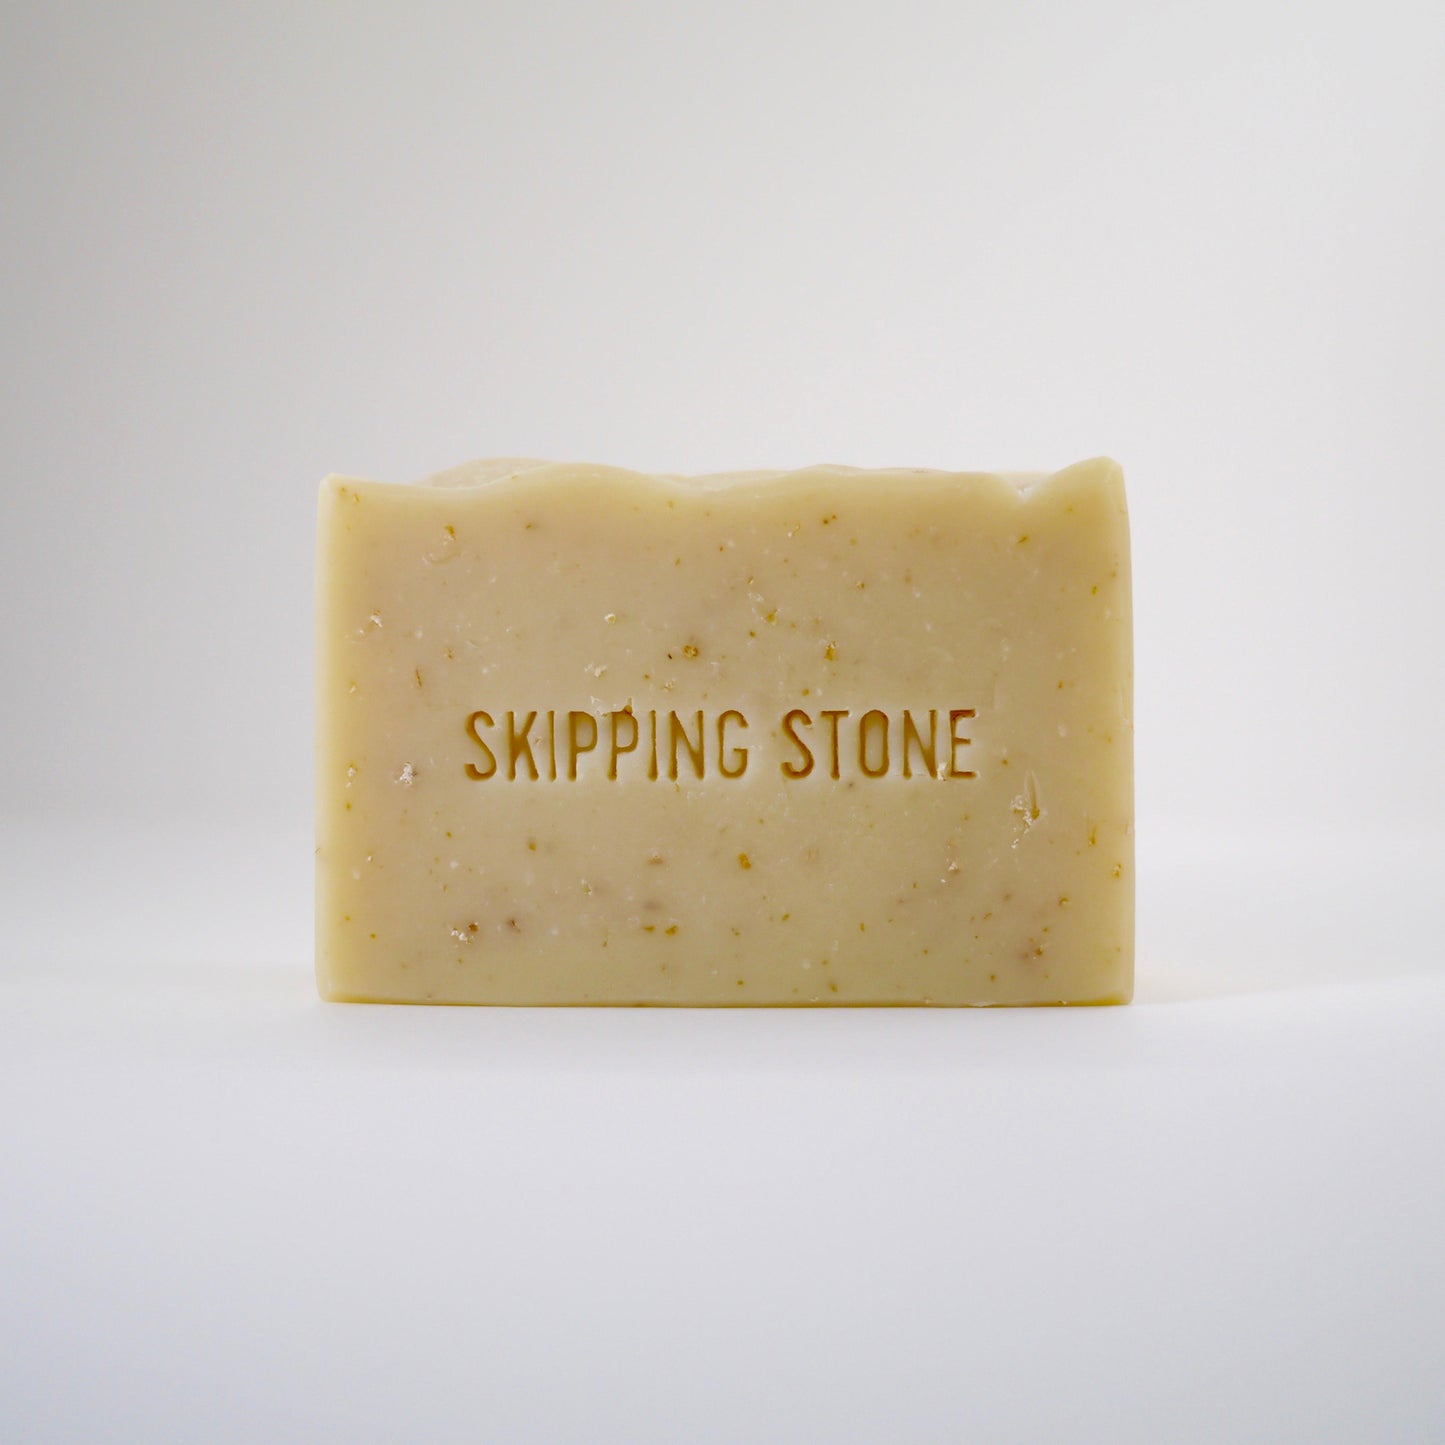 Skipping Stone Soap Pure. Oatmeal + Honey Body + Face Soap – unscented